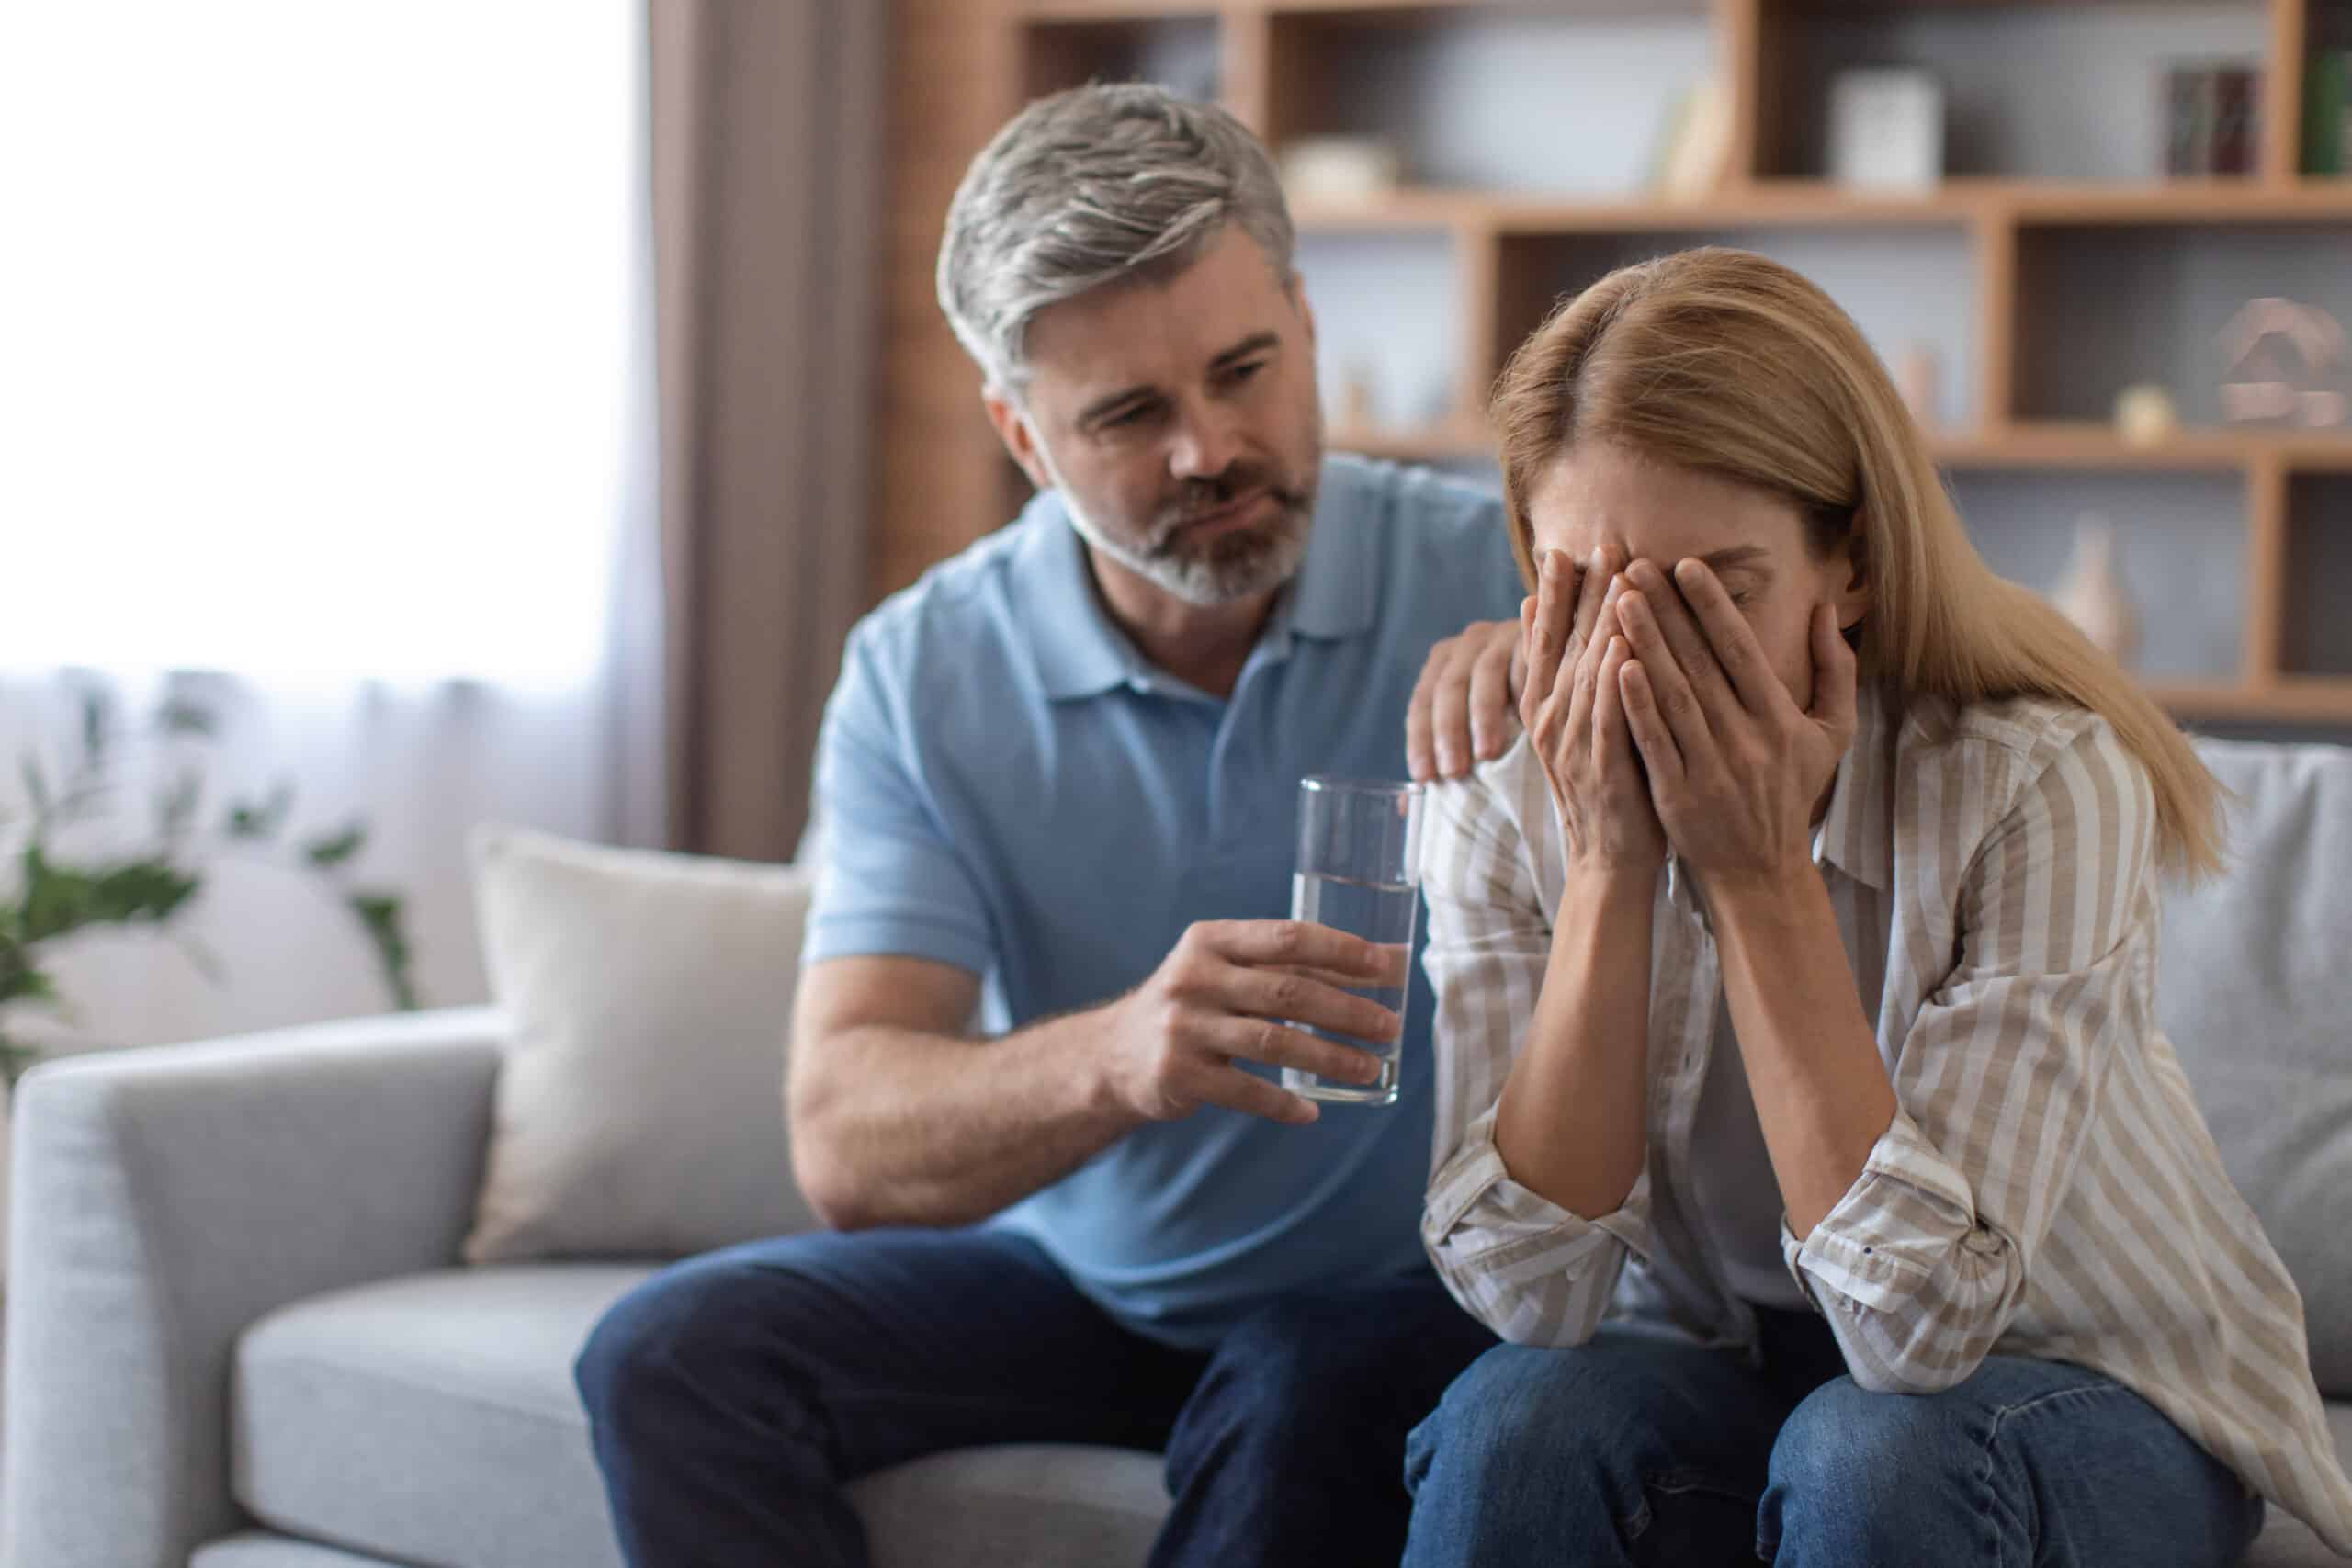 Serious mature caucasian husband calm upset crying wife, gives glass of water, lady suffers from pain and depression in room interior. Bad news, illness, stress, relationship problems and support